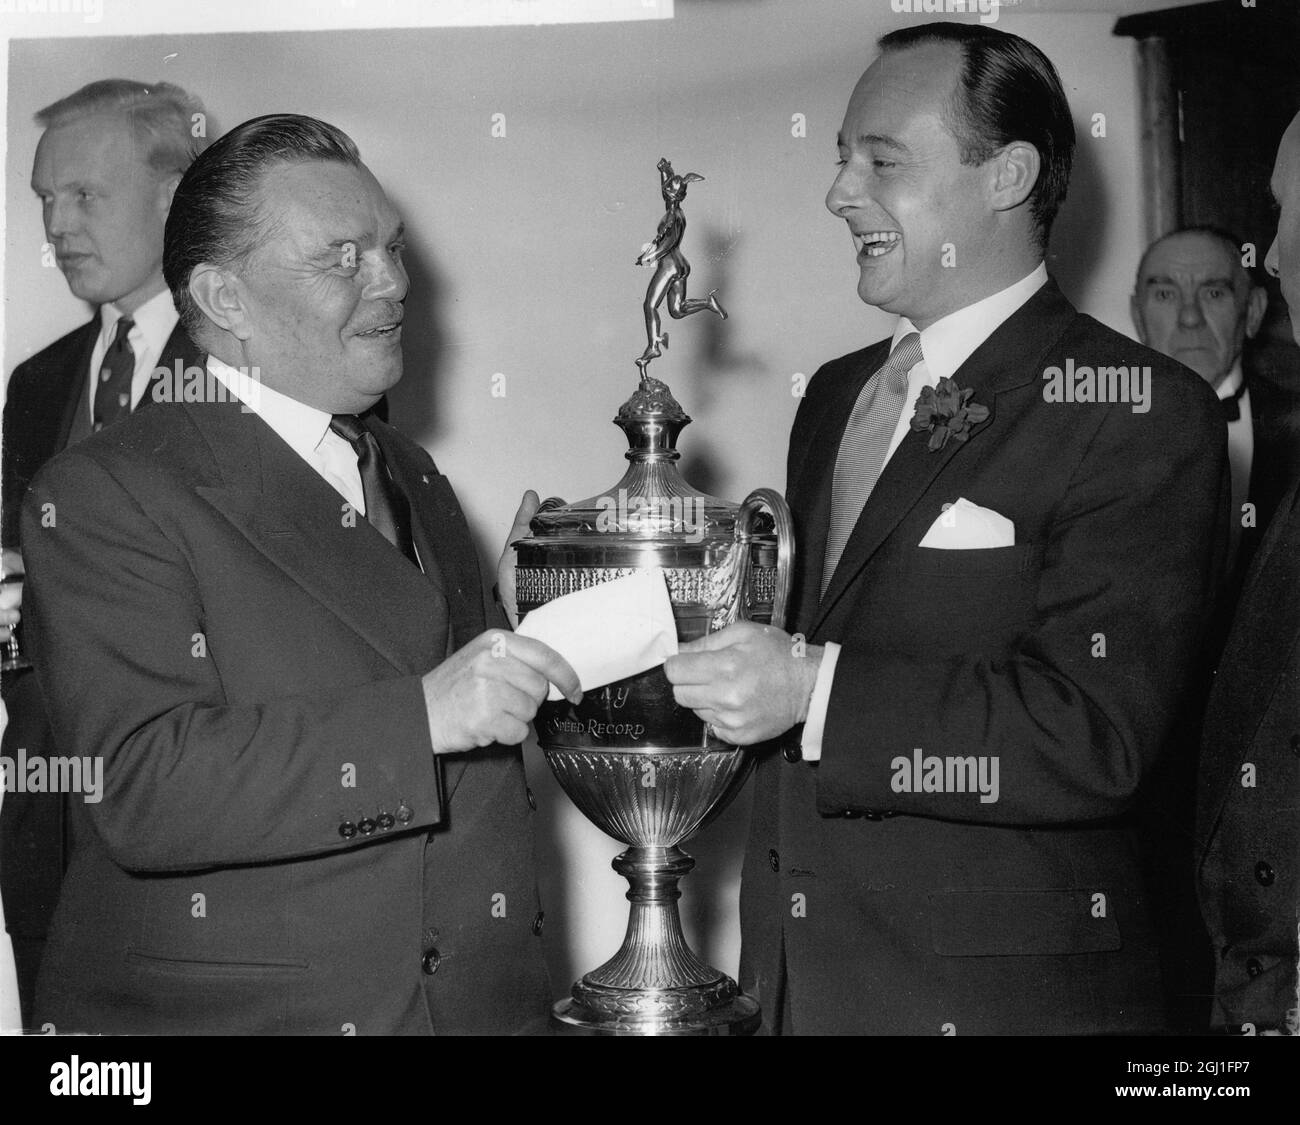 Billy Butlin presents a gold cup and a cheque for £5000 to Donald Campbell for raising his own world water speed record . Variety Club's annual Sport celebrities luncheon at Savoy Hotel , London . 13 January 1959 Stock Photo